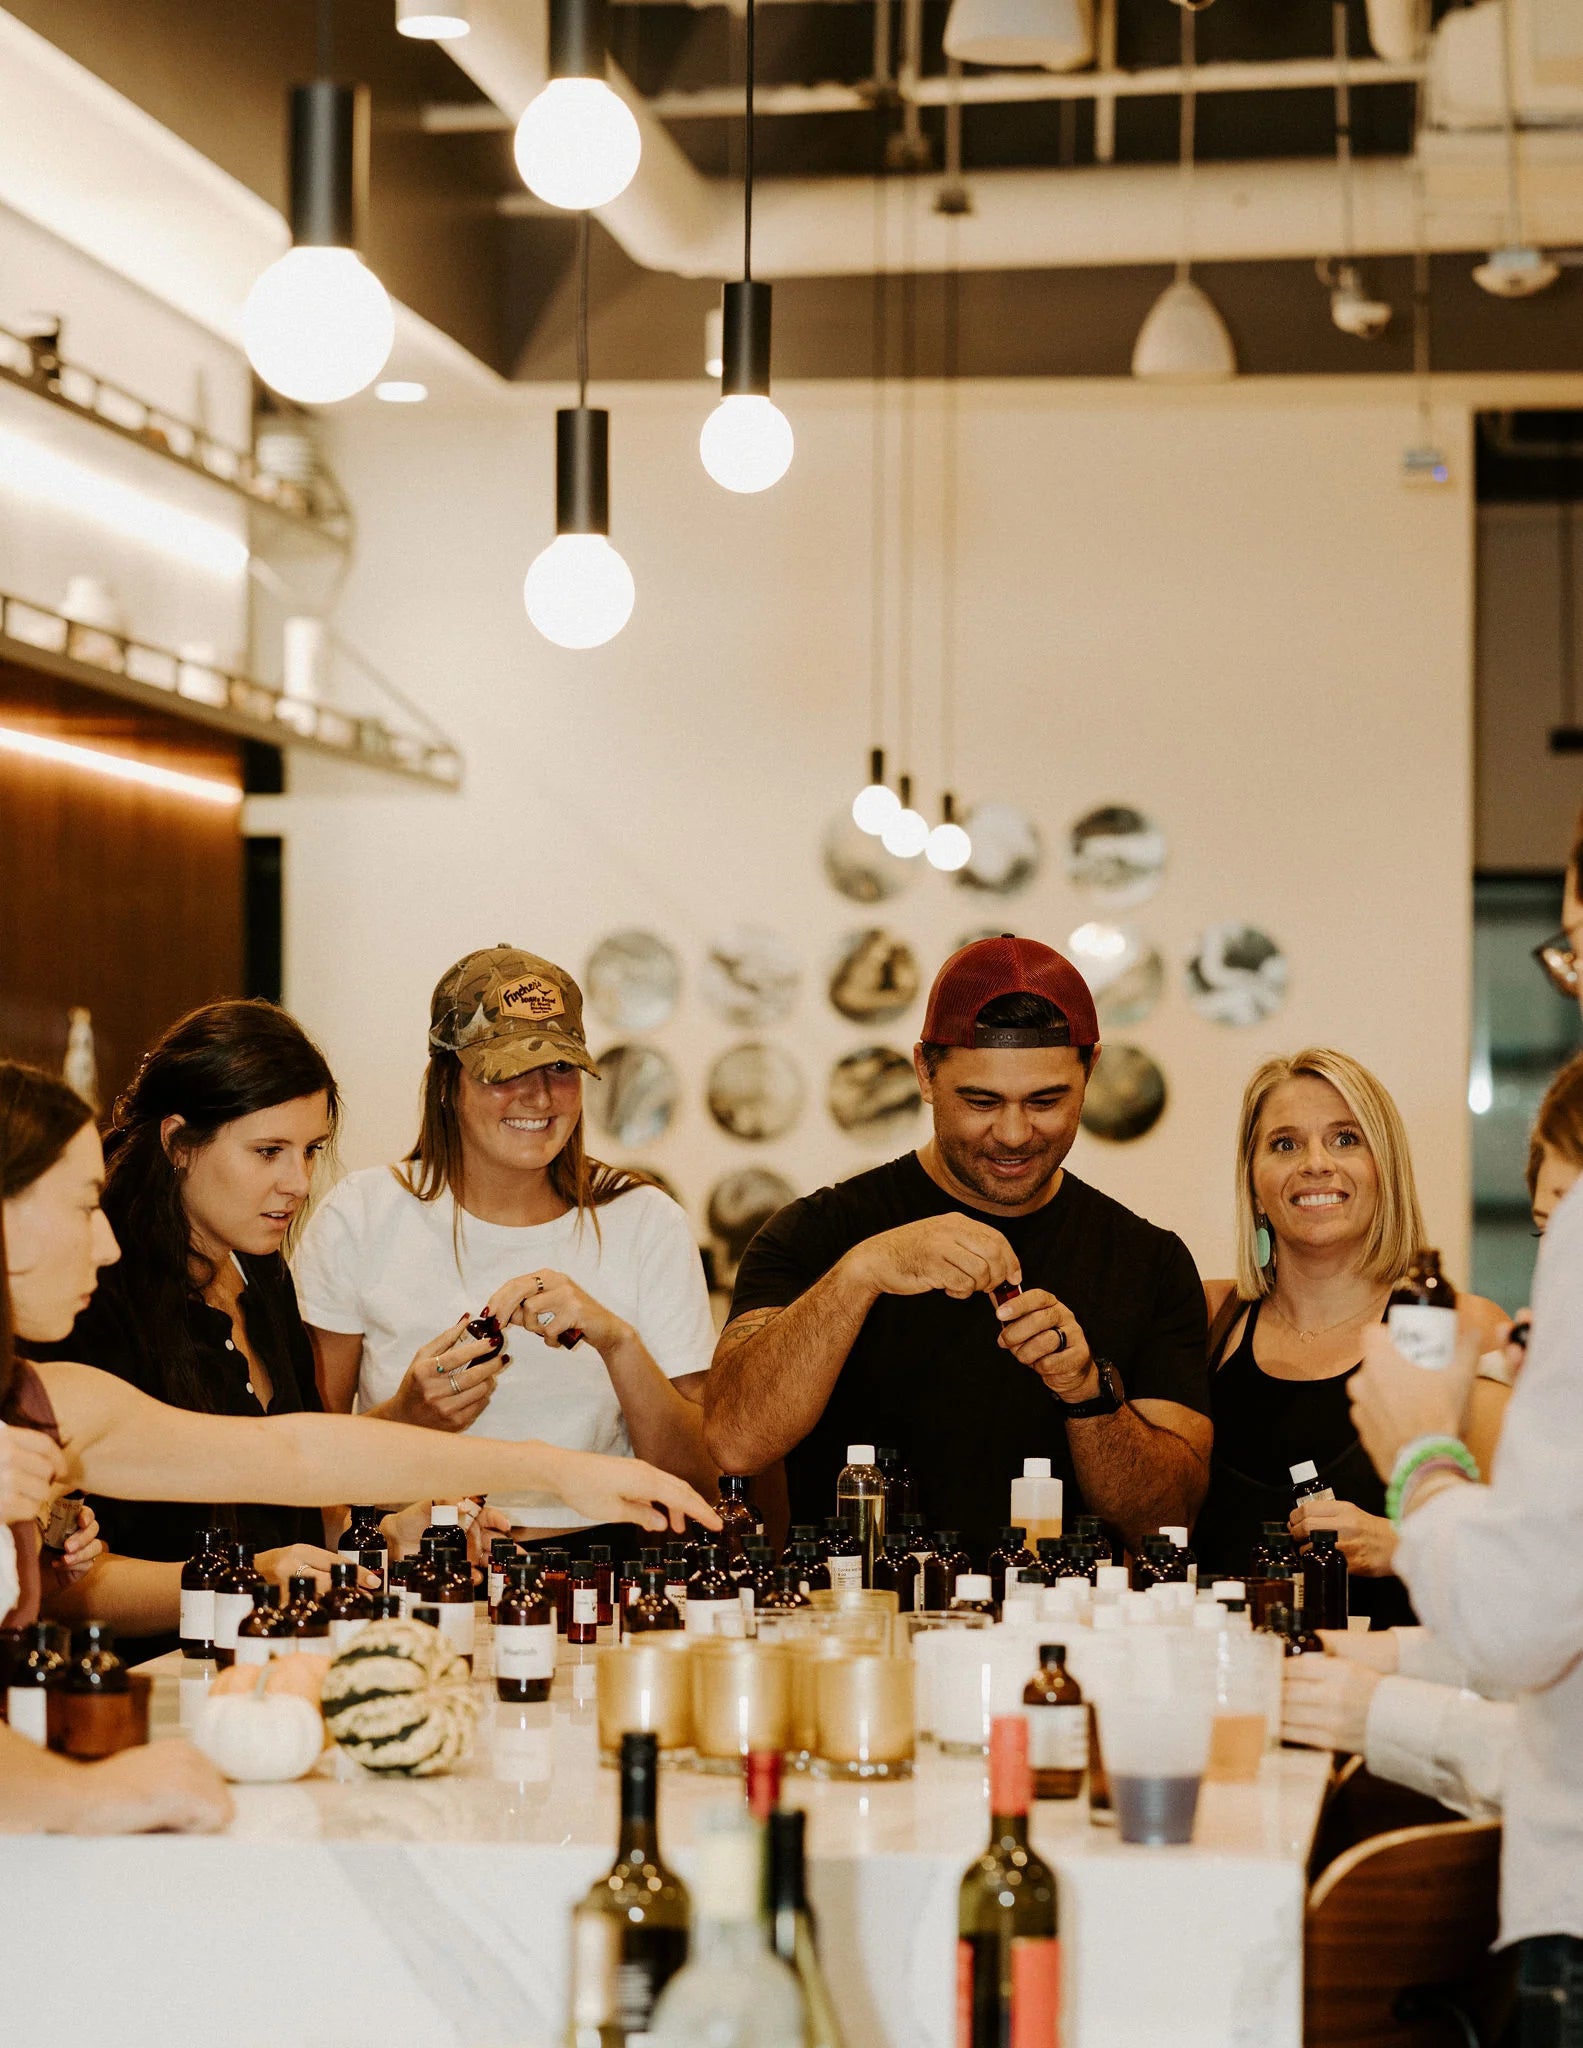 The Candle Making Experience: Orlando, FL [Fri. 6/7, 7-9PM] - Community Candle Co.